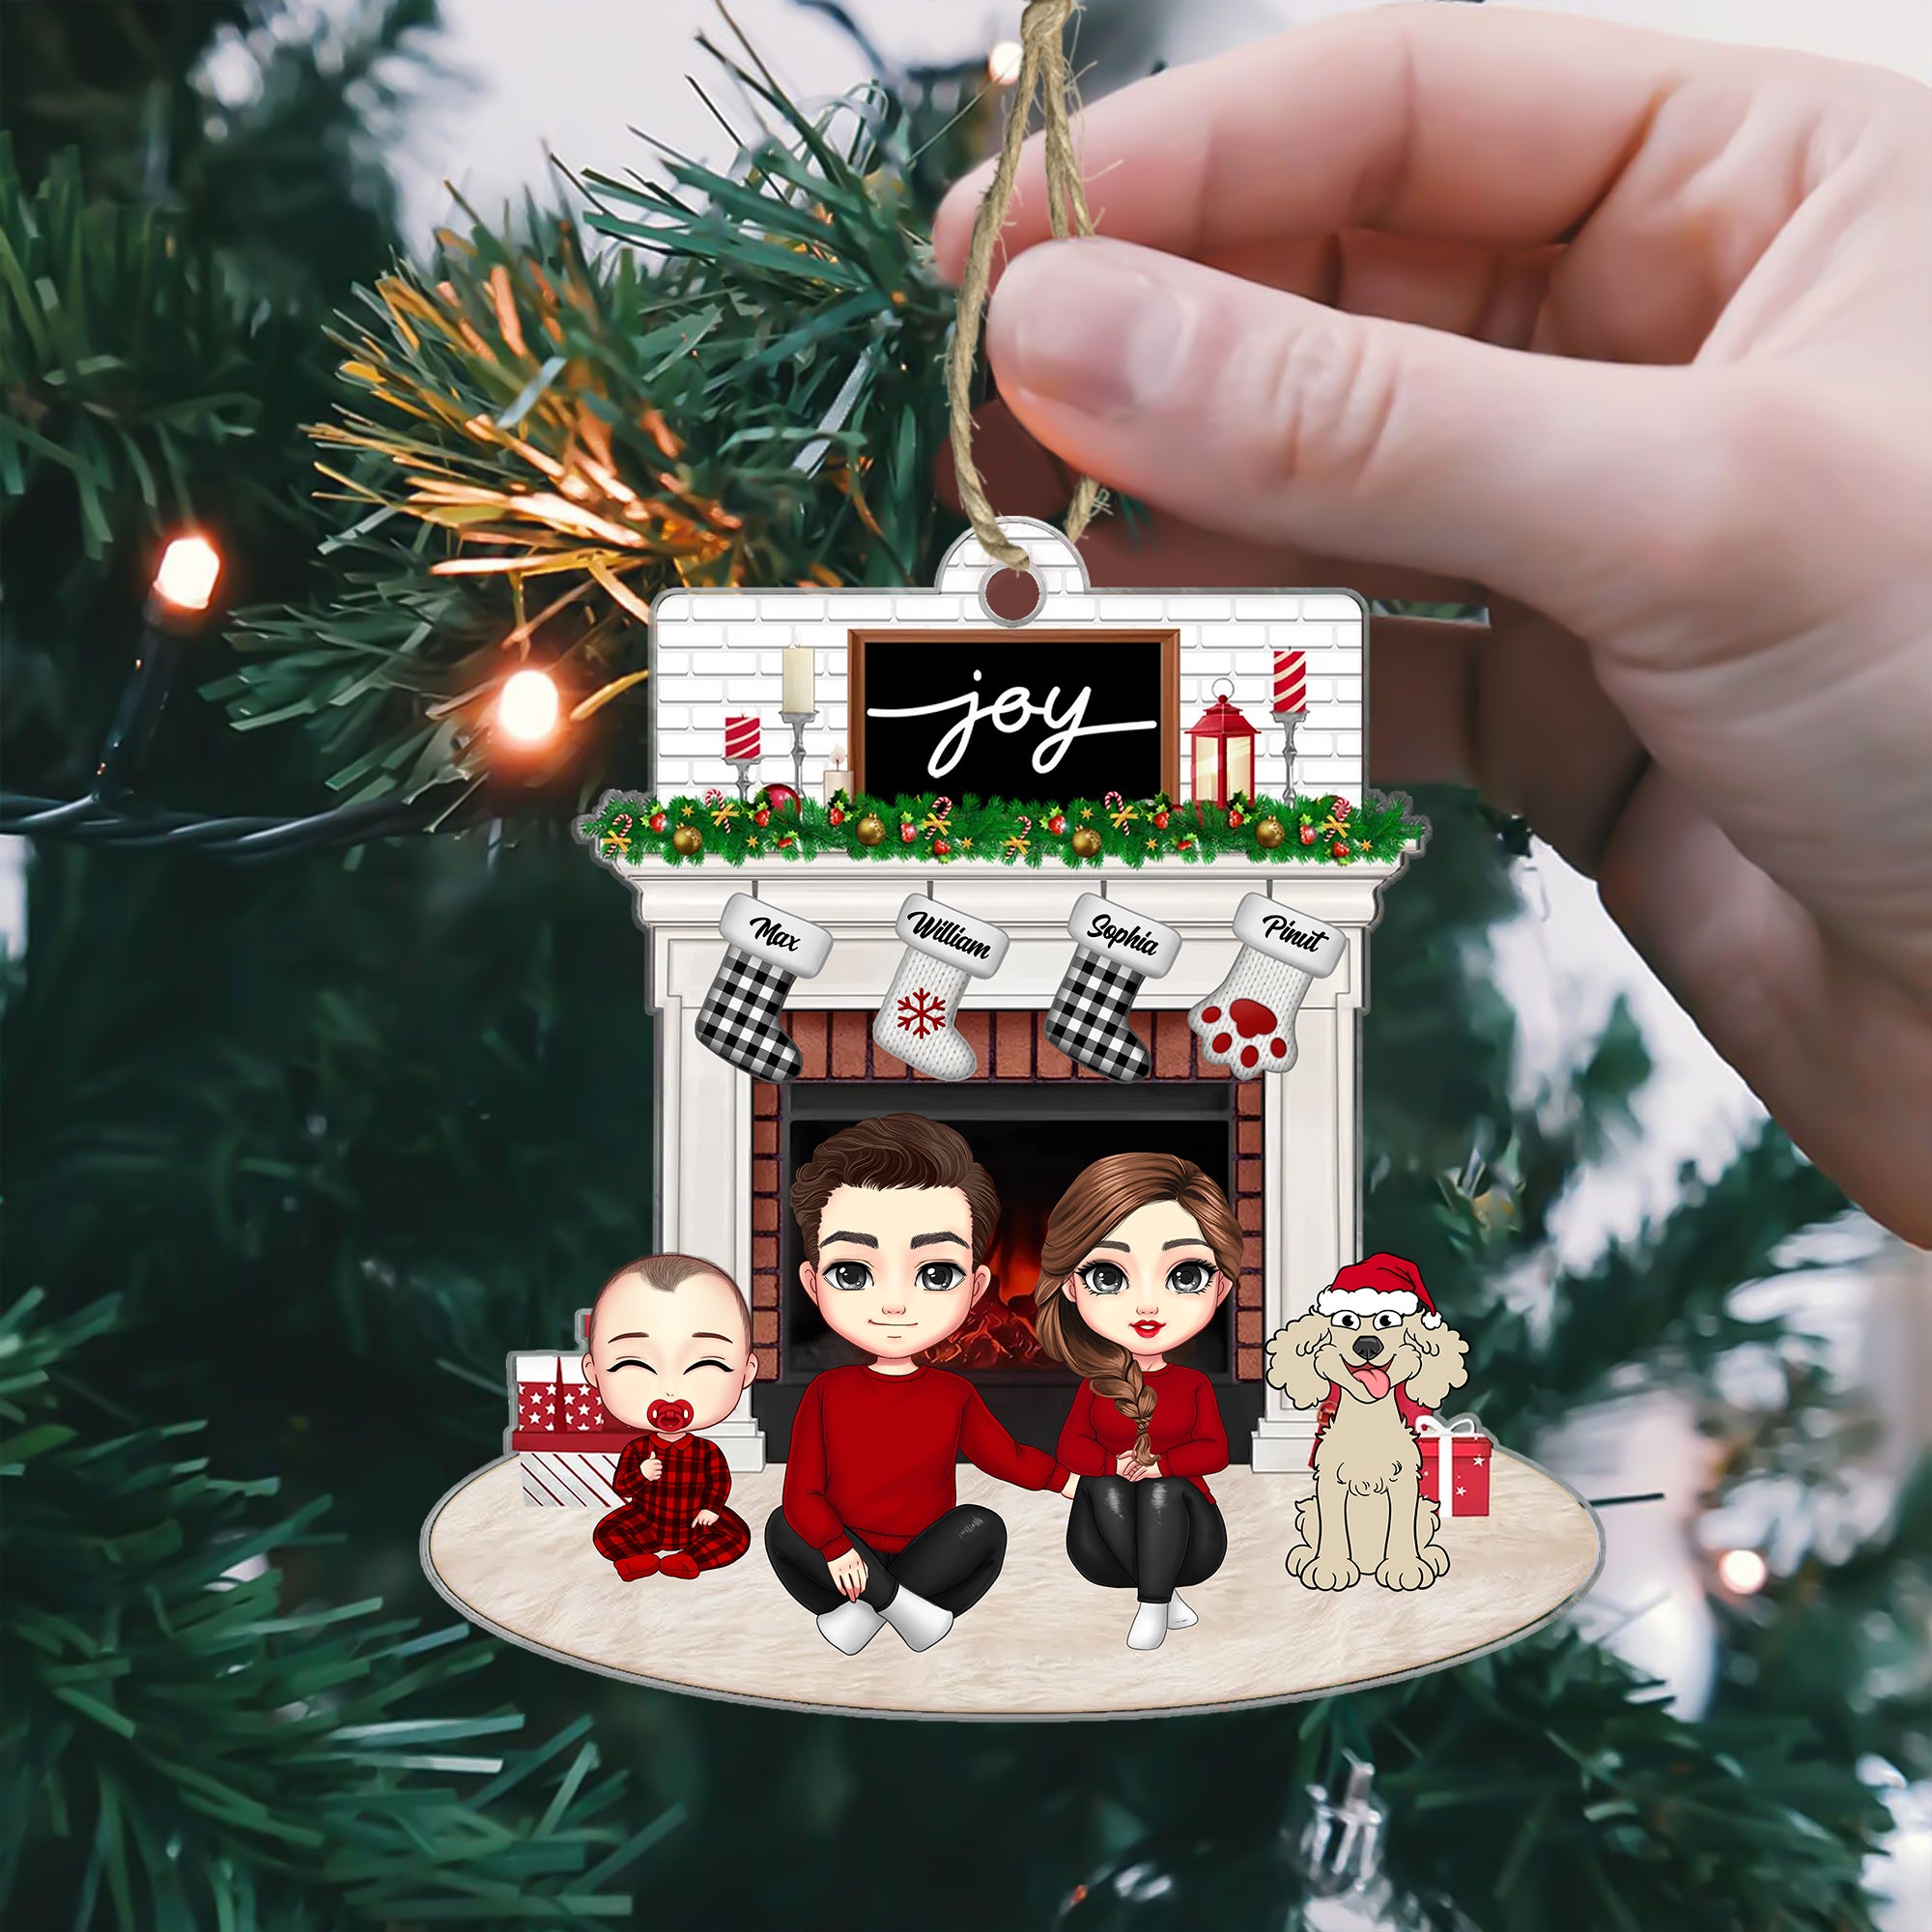 Joy Christmas Family By The Fireplace - Personalized Acrylic Ornament - Gift For Family, Xmas Gift